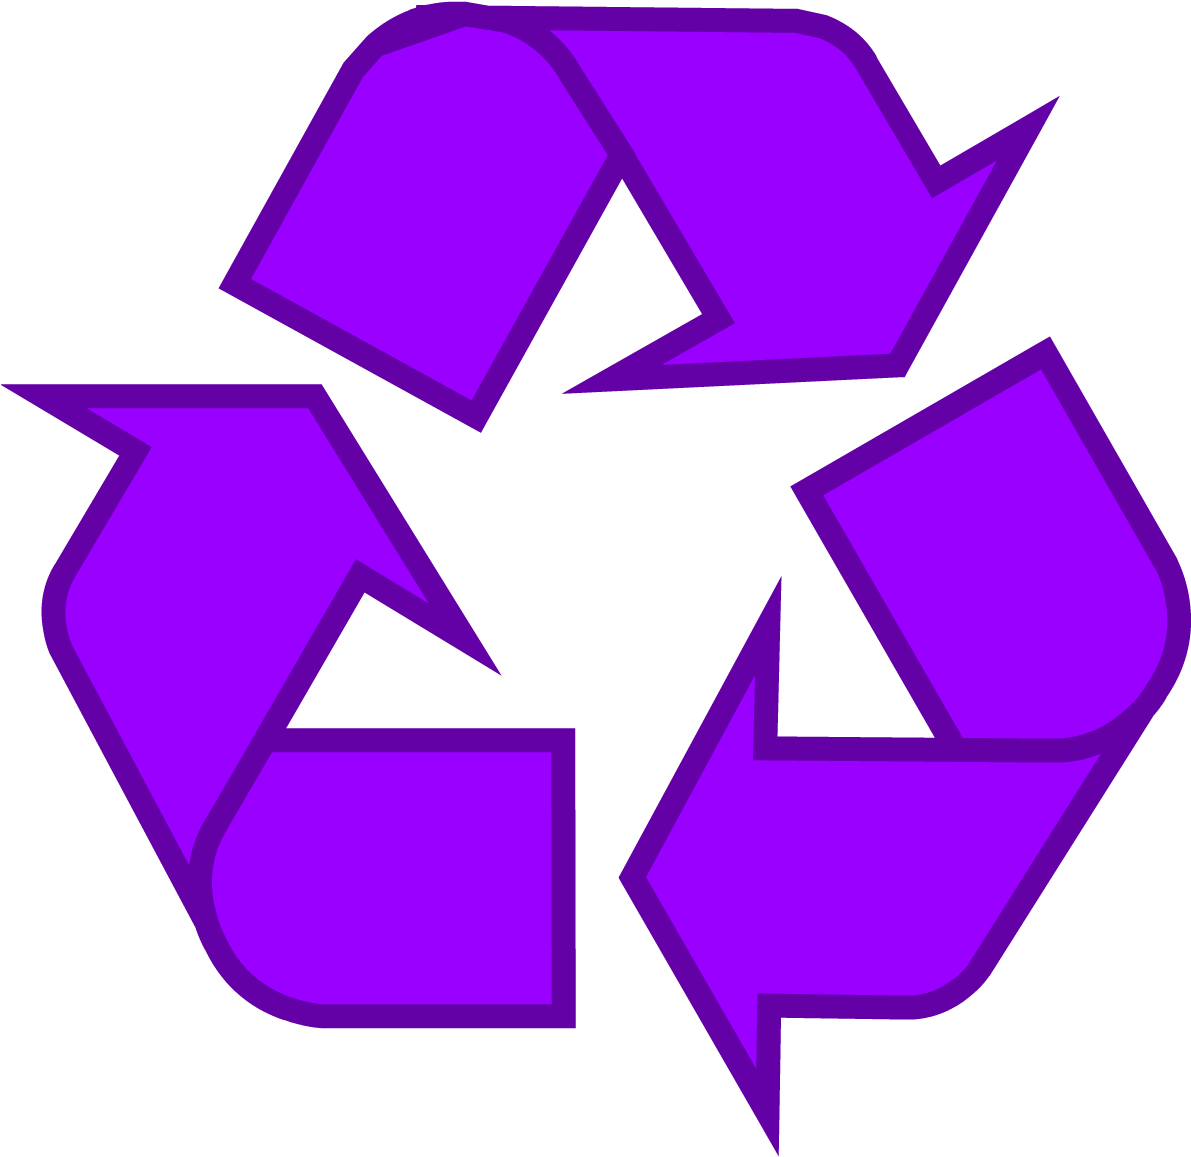 Pictures Of Recycling Symbols - Recycle Symbol (1200x1171)